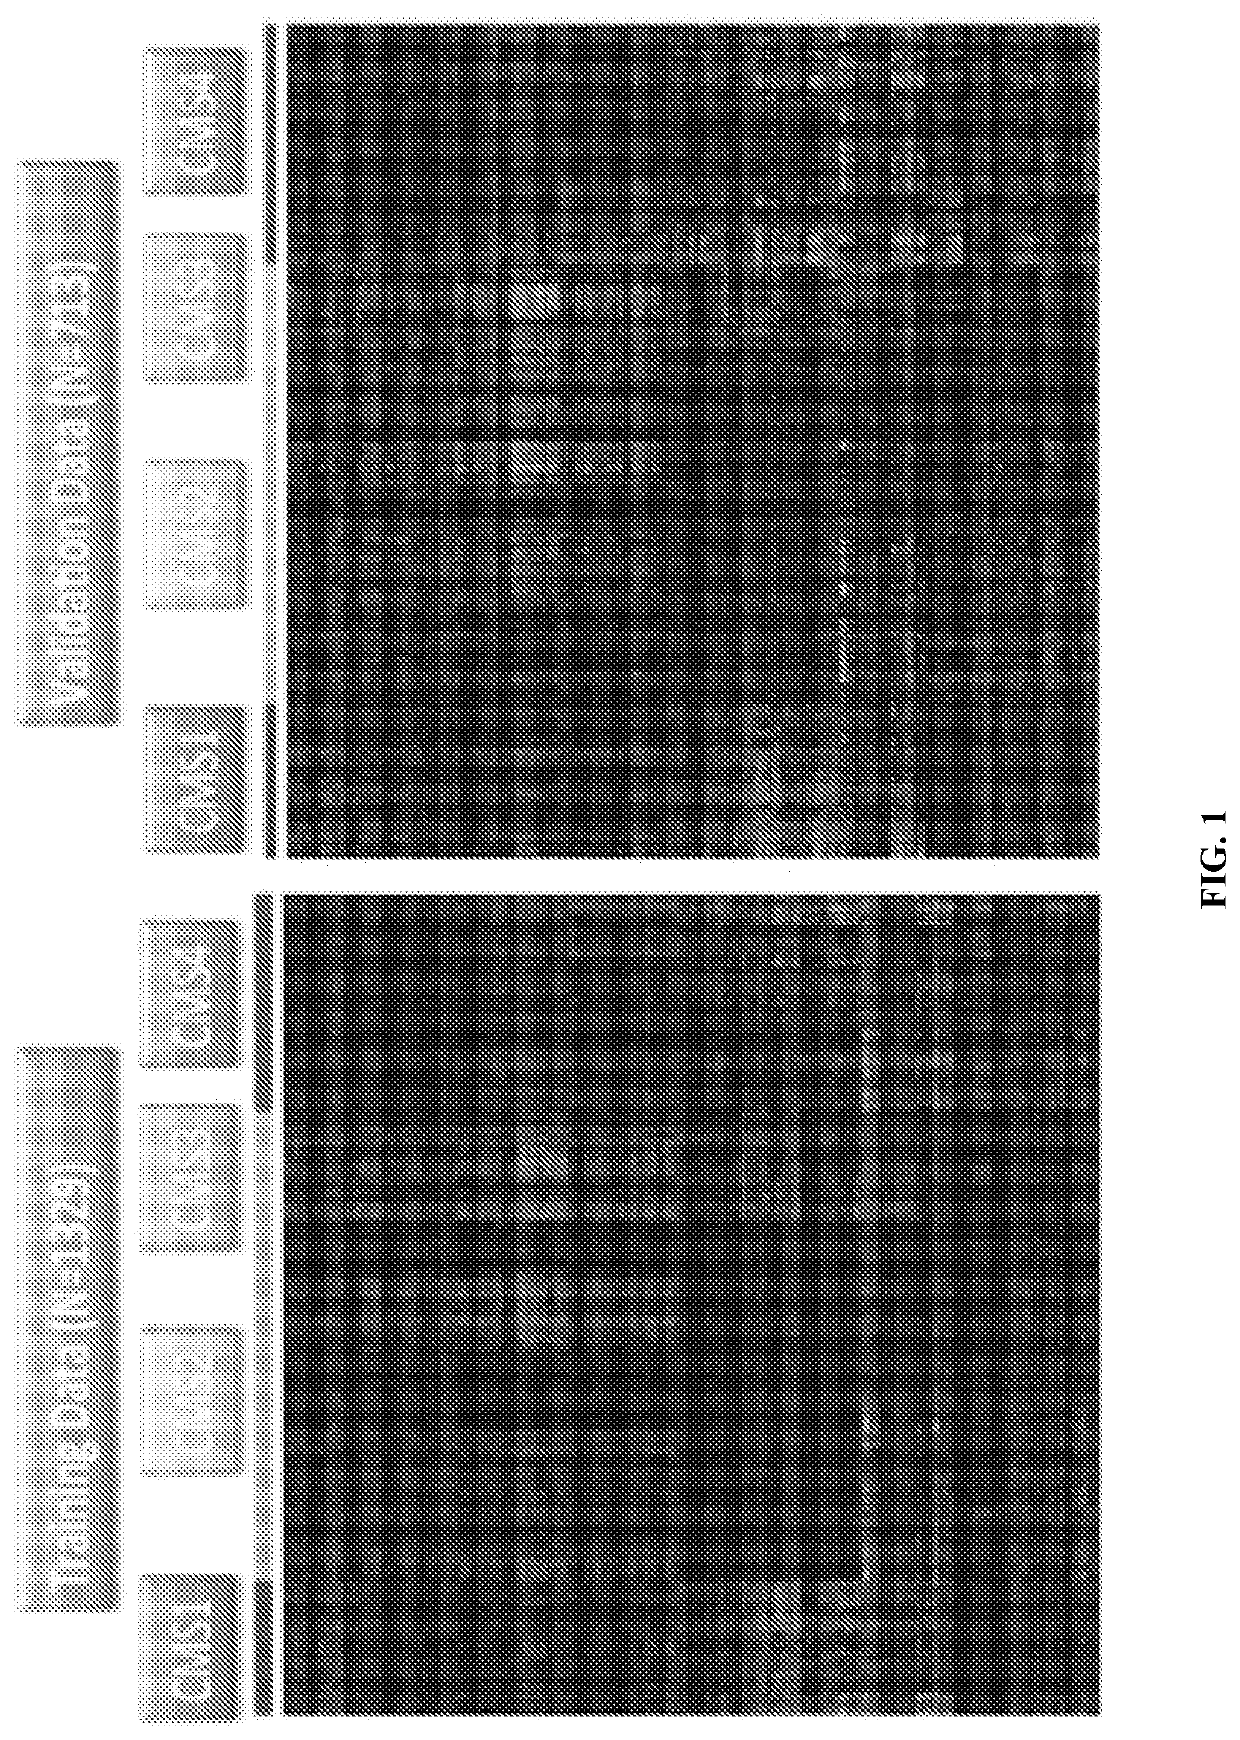 Colorectal cancer consensus molecular subtype classifier codesets and methods of use thereof